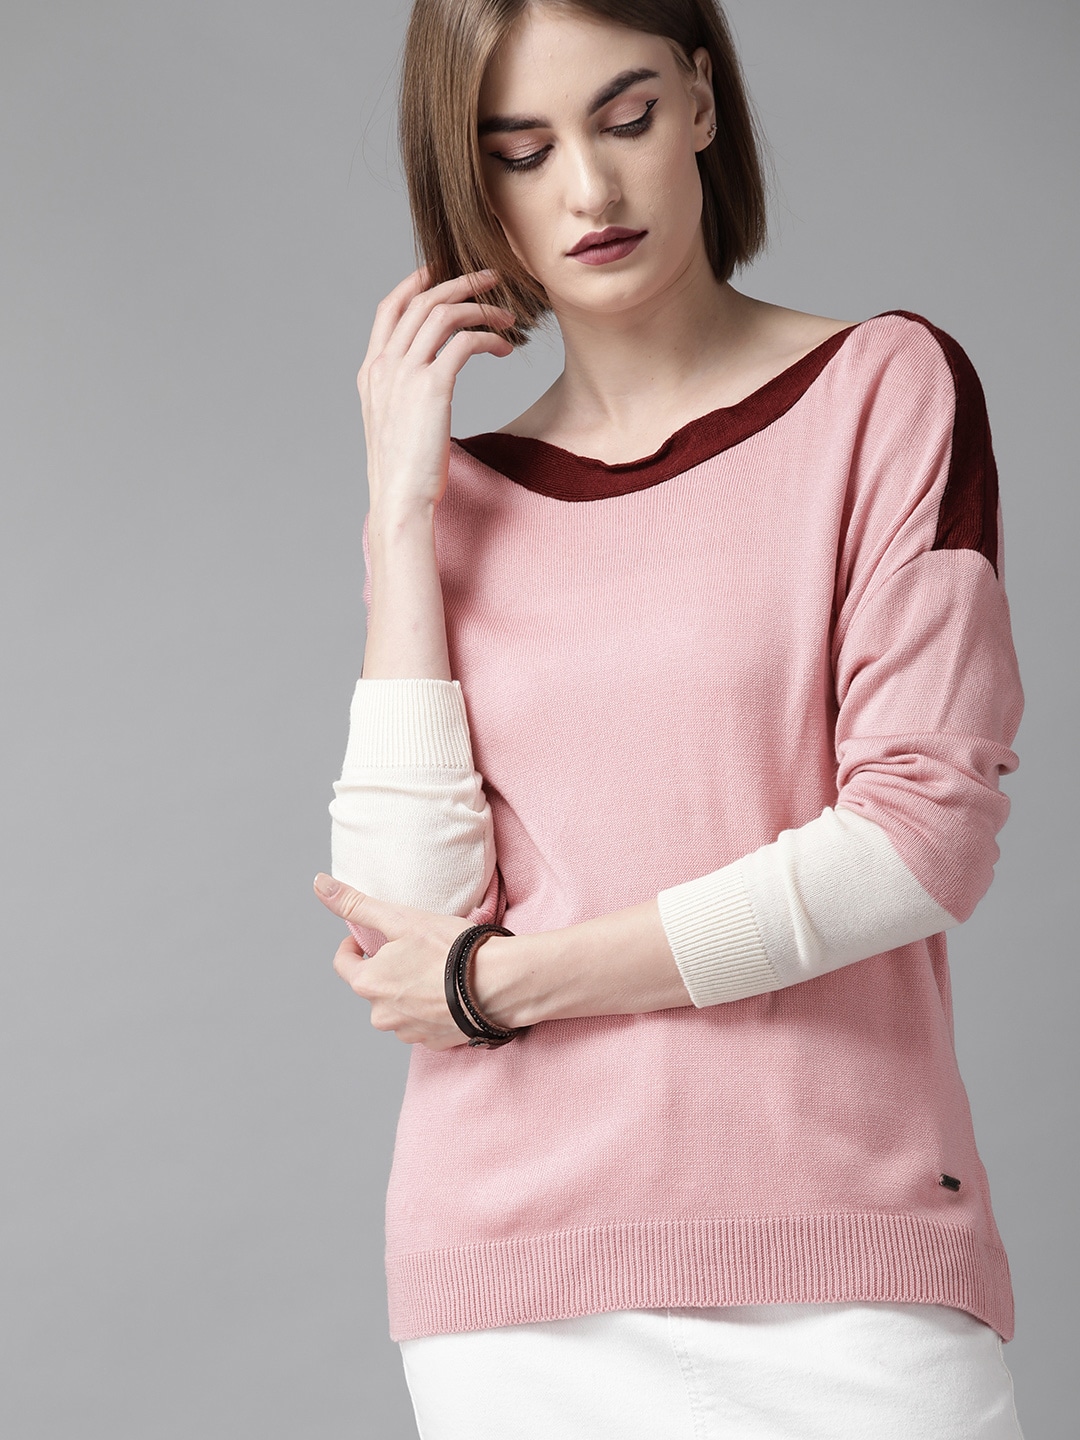 The Roadster Lifestyle Co Women Pink Solid Sweater Price in India